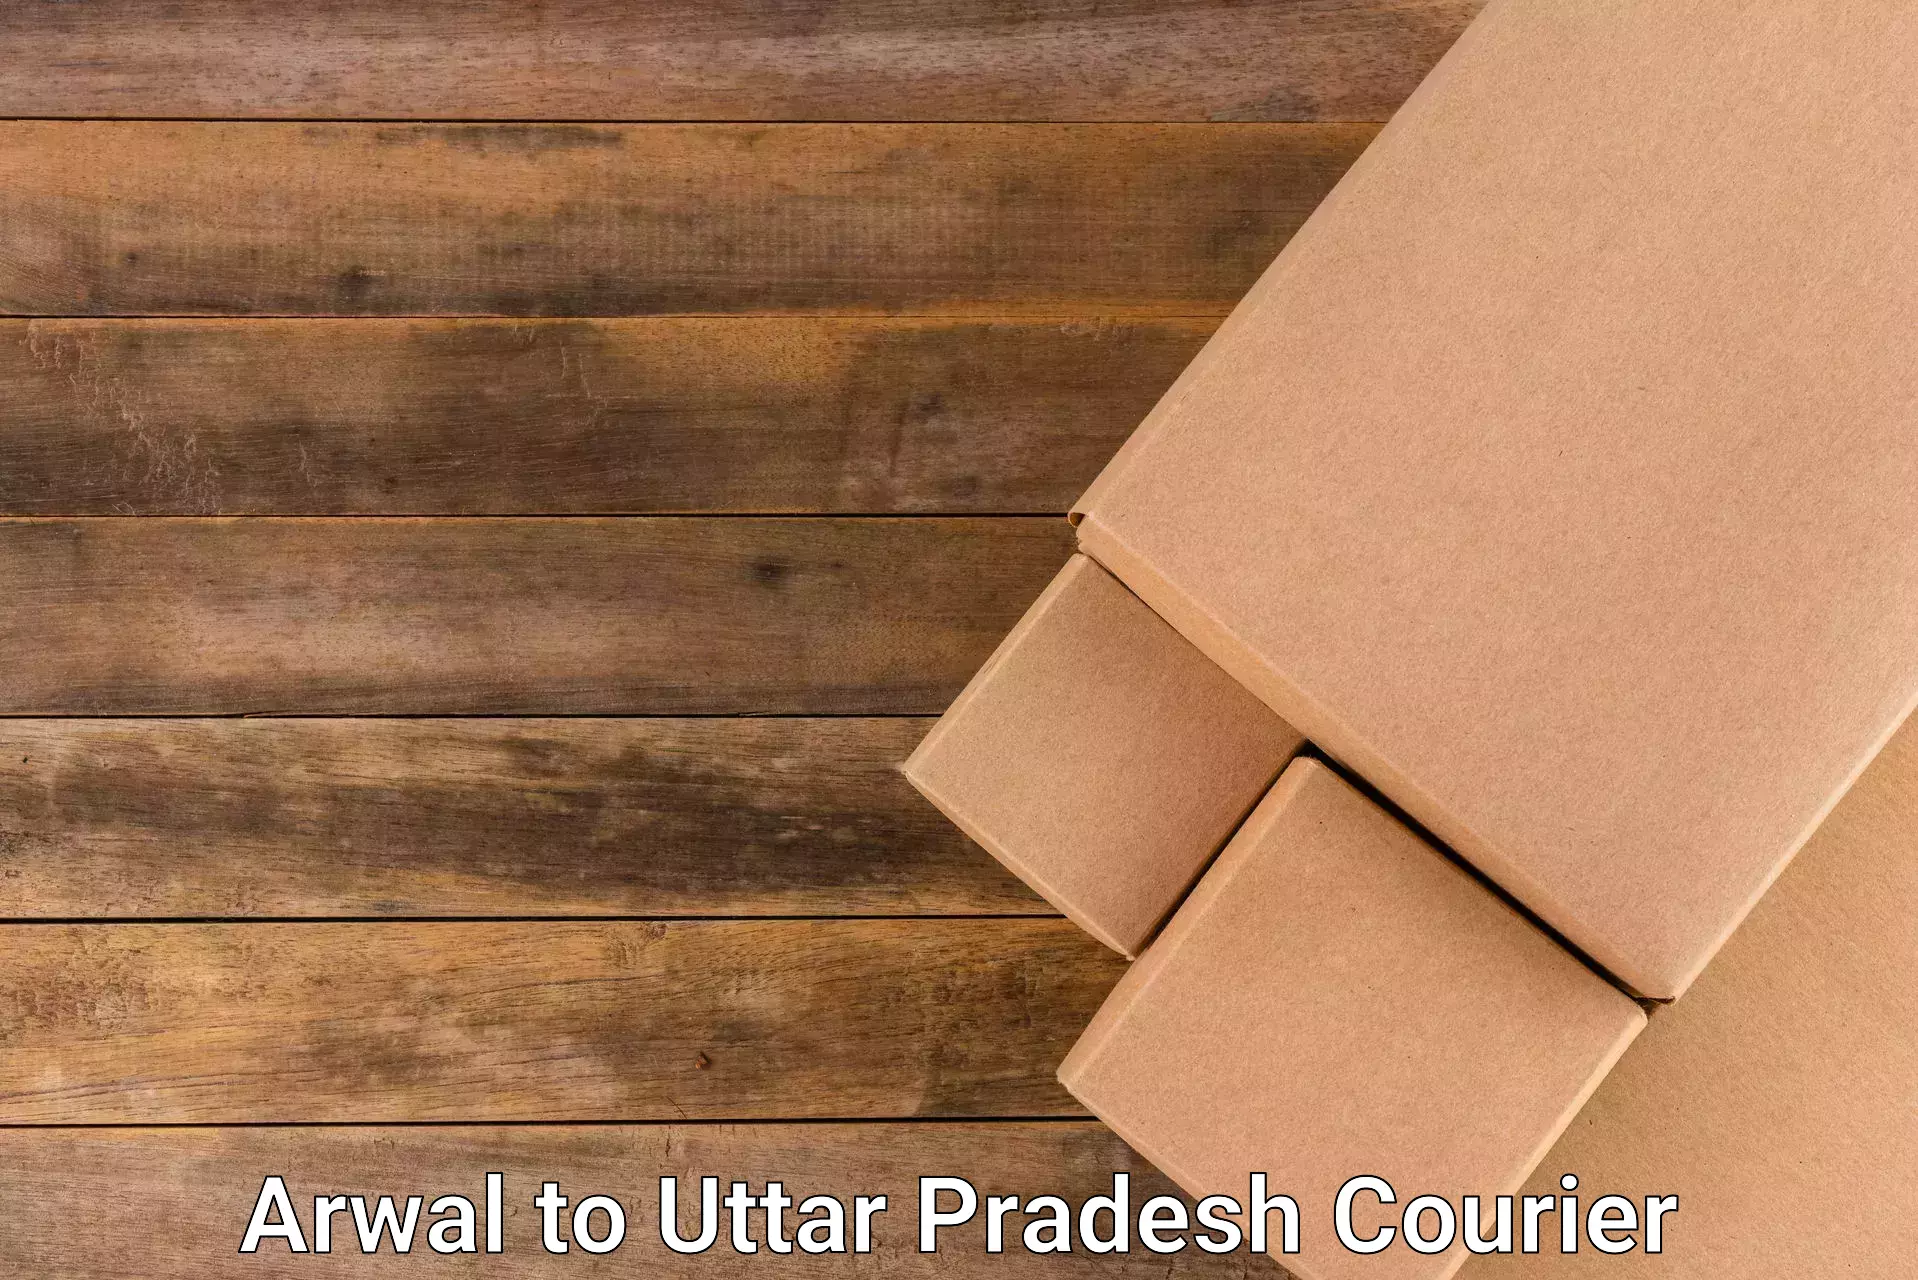 Customized shipping options Arwal to Vrindavan